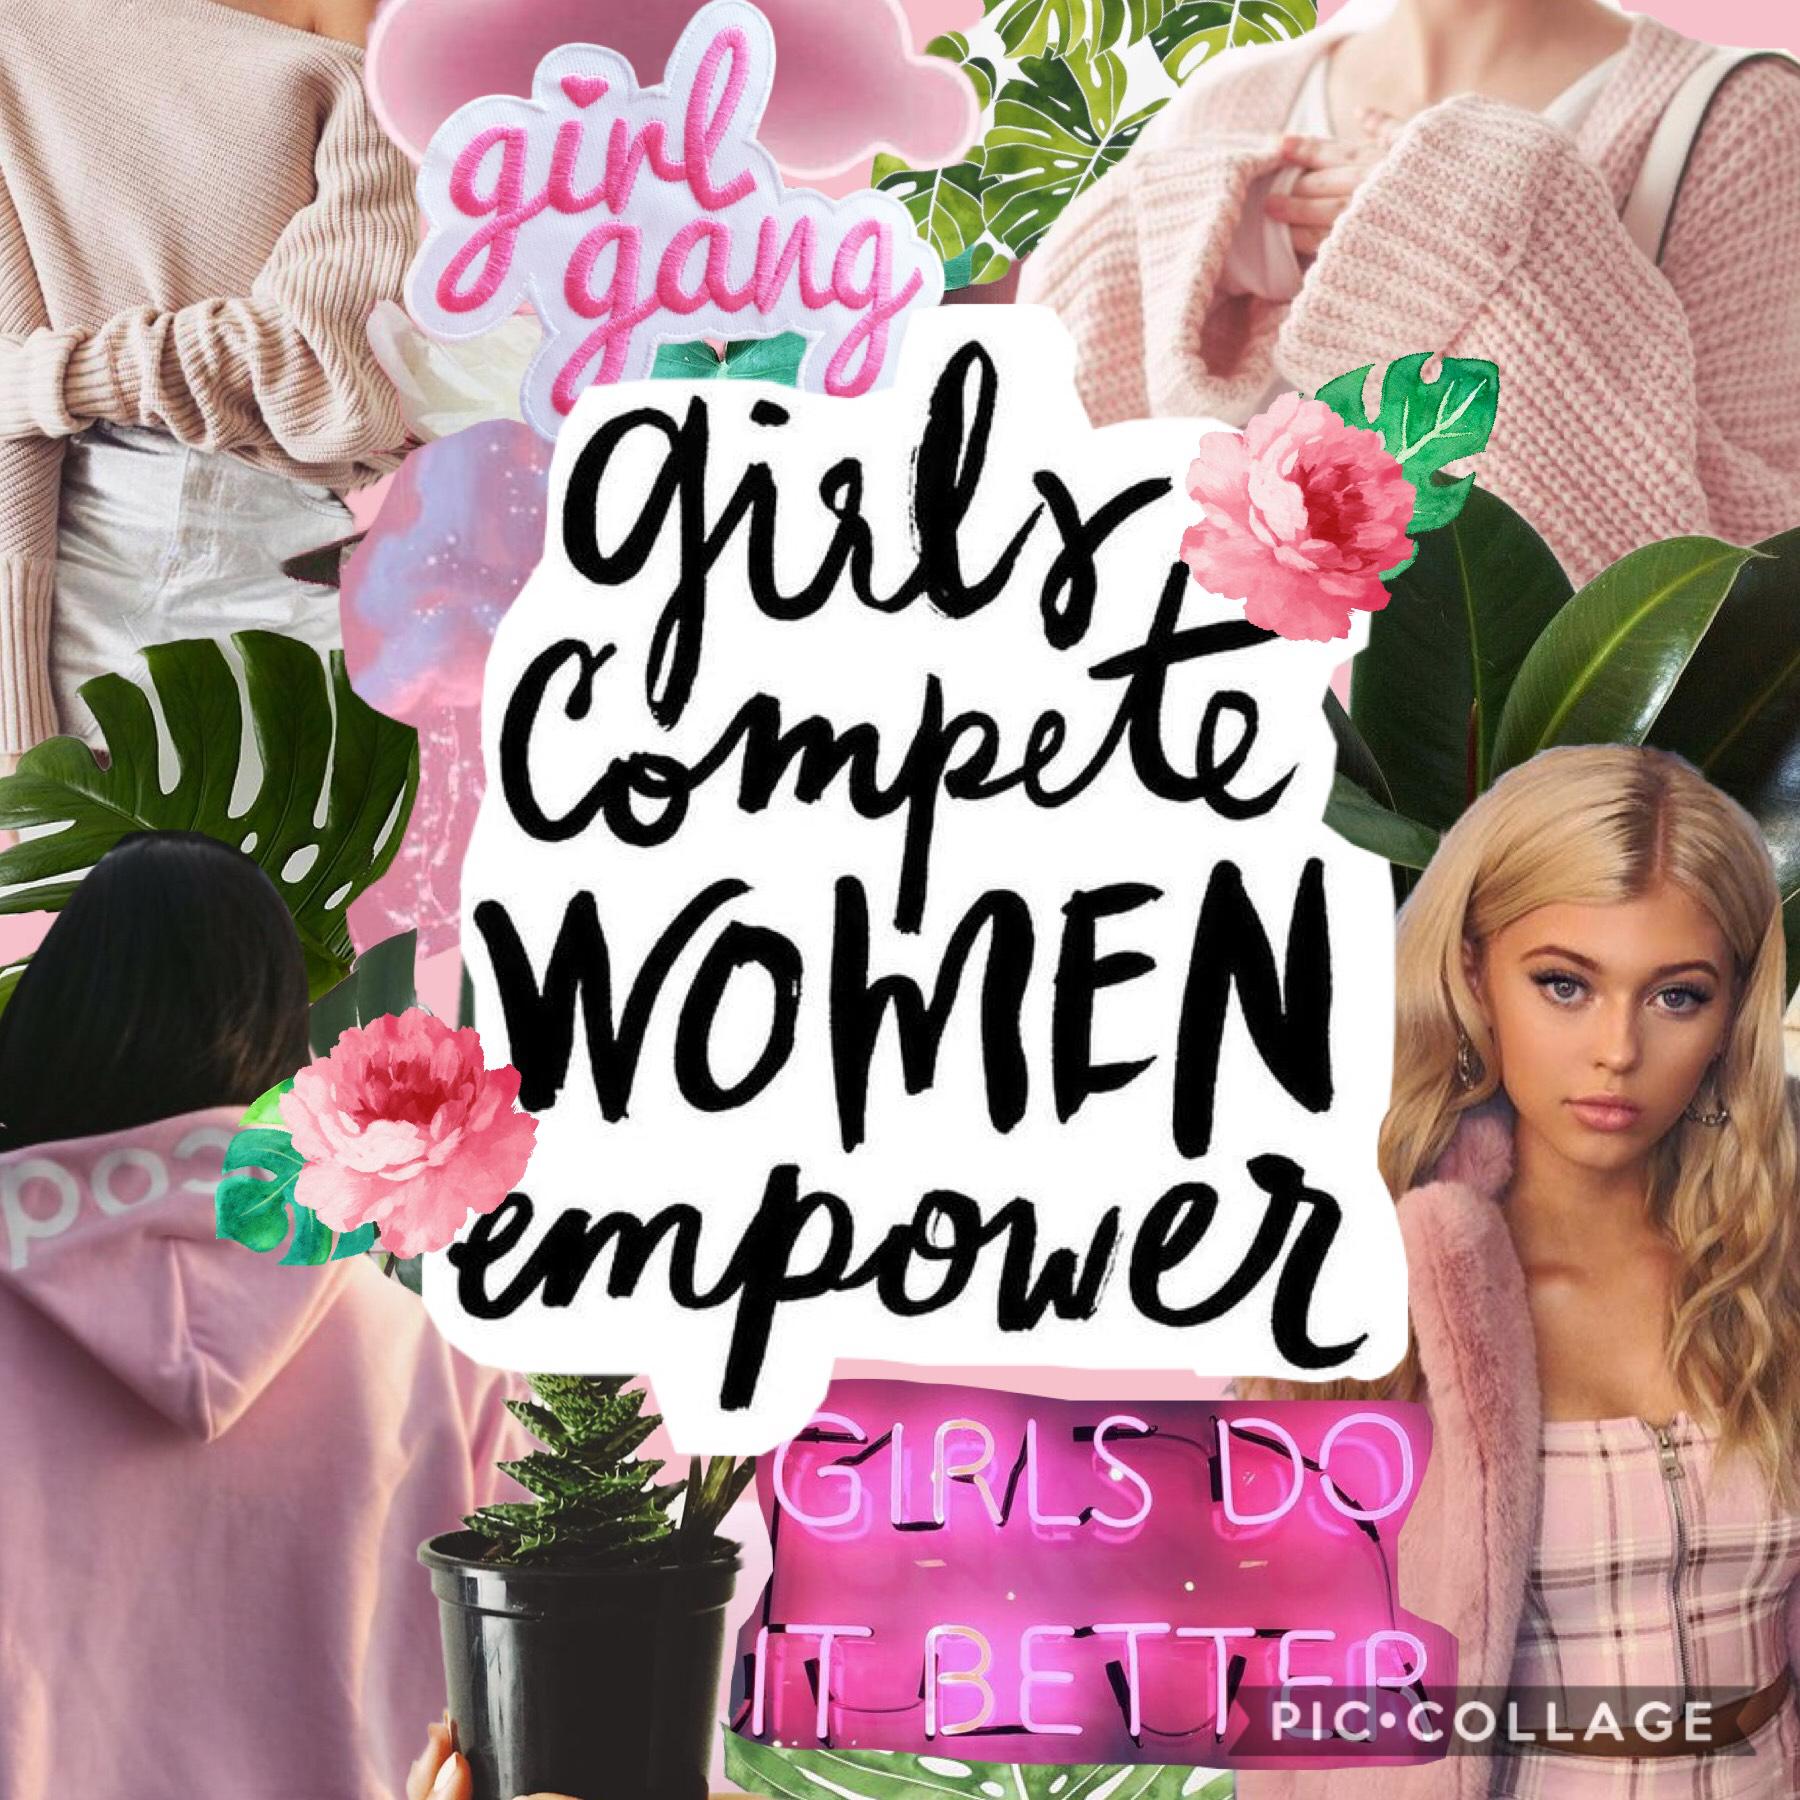 hey guys I’m back!🙋🏻‍♀️I’ve decided to make this #girlpower collage because why not?👩🏻👩🏼👩🏽👩🏾👩🏿💘